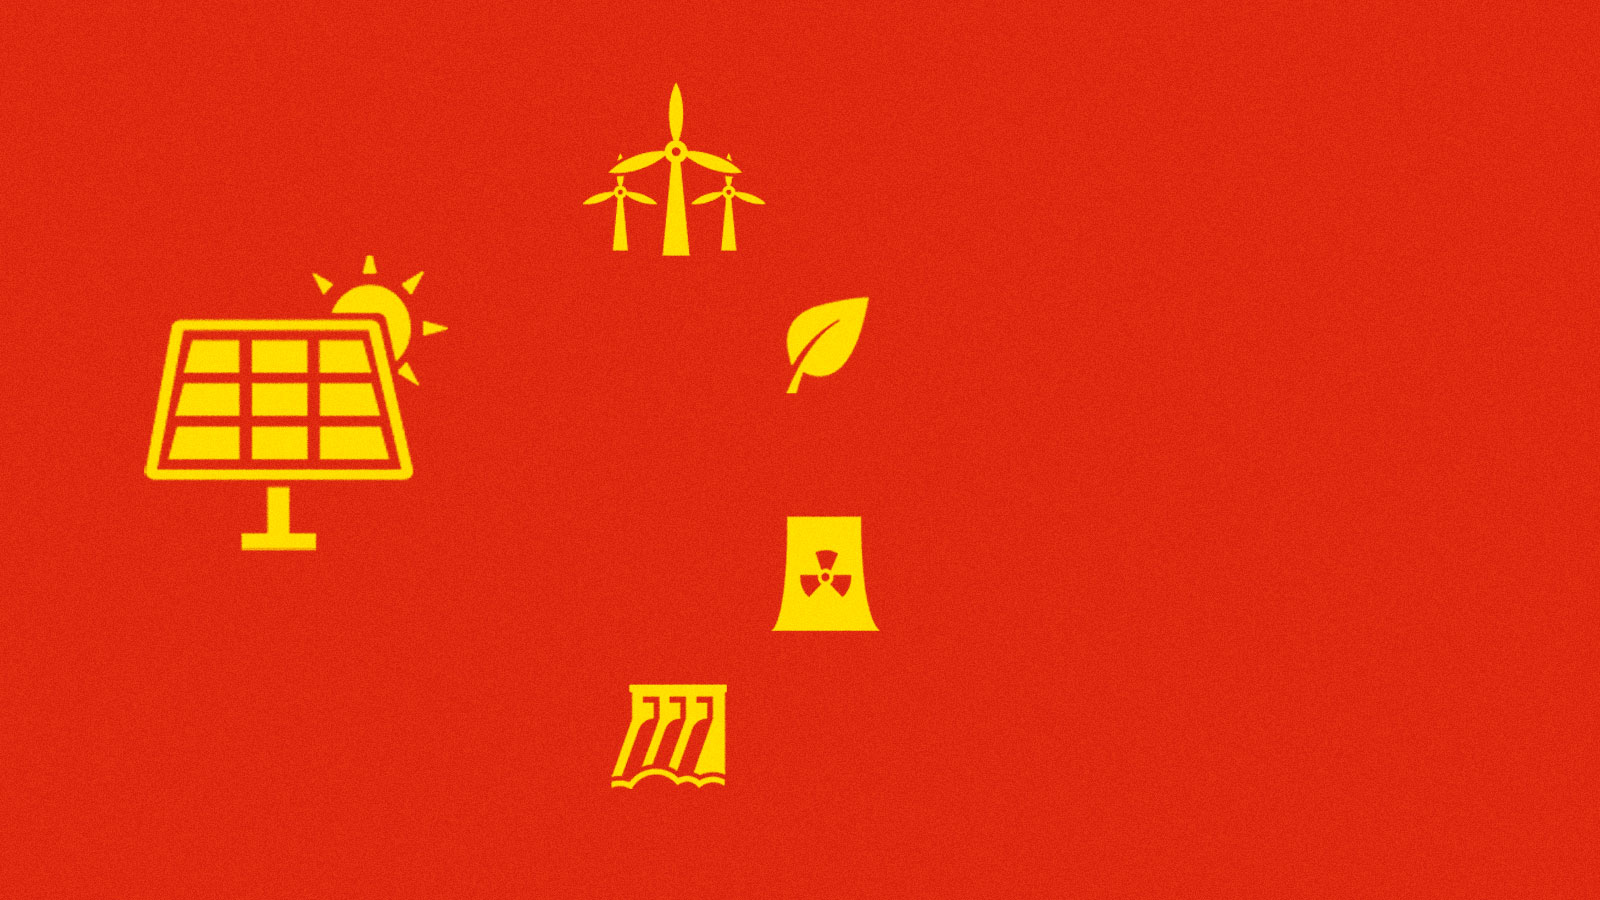 A stylized version of the Chinese flag with green energy icons in place of the stars